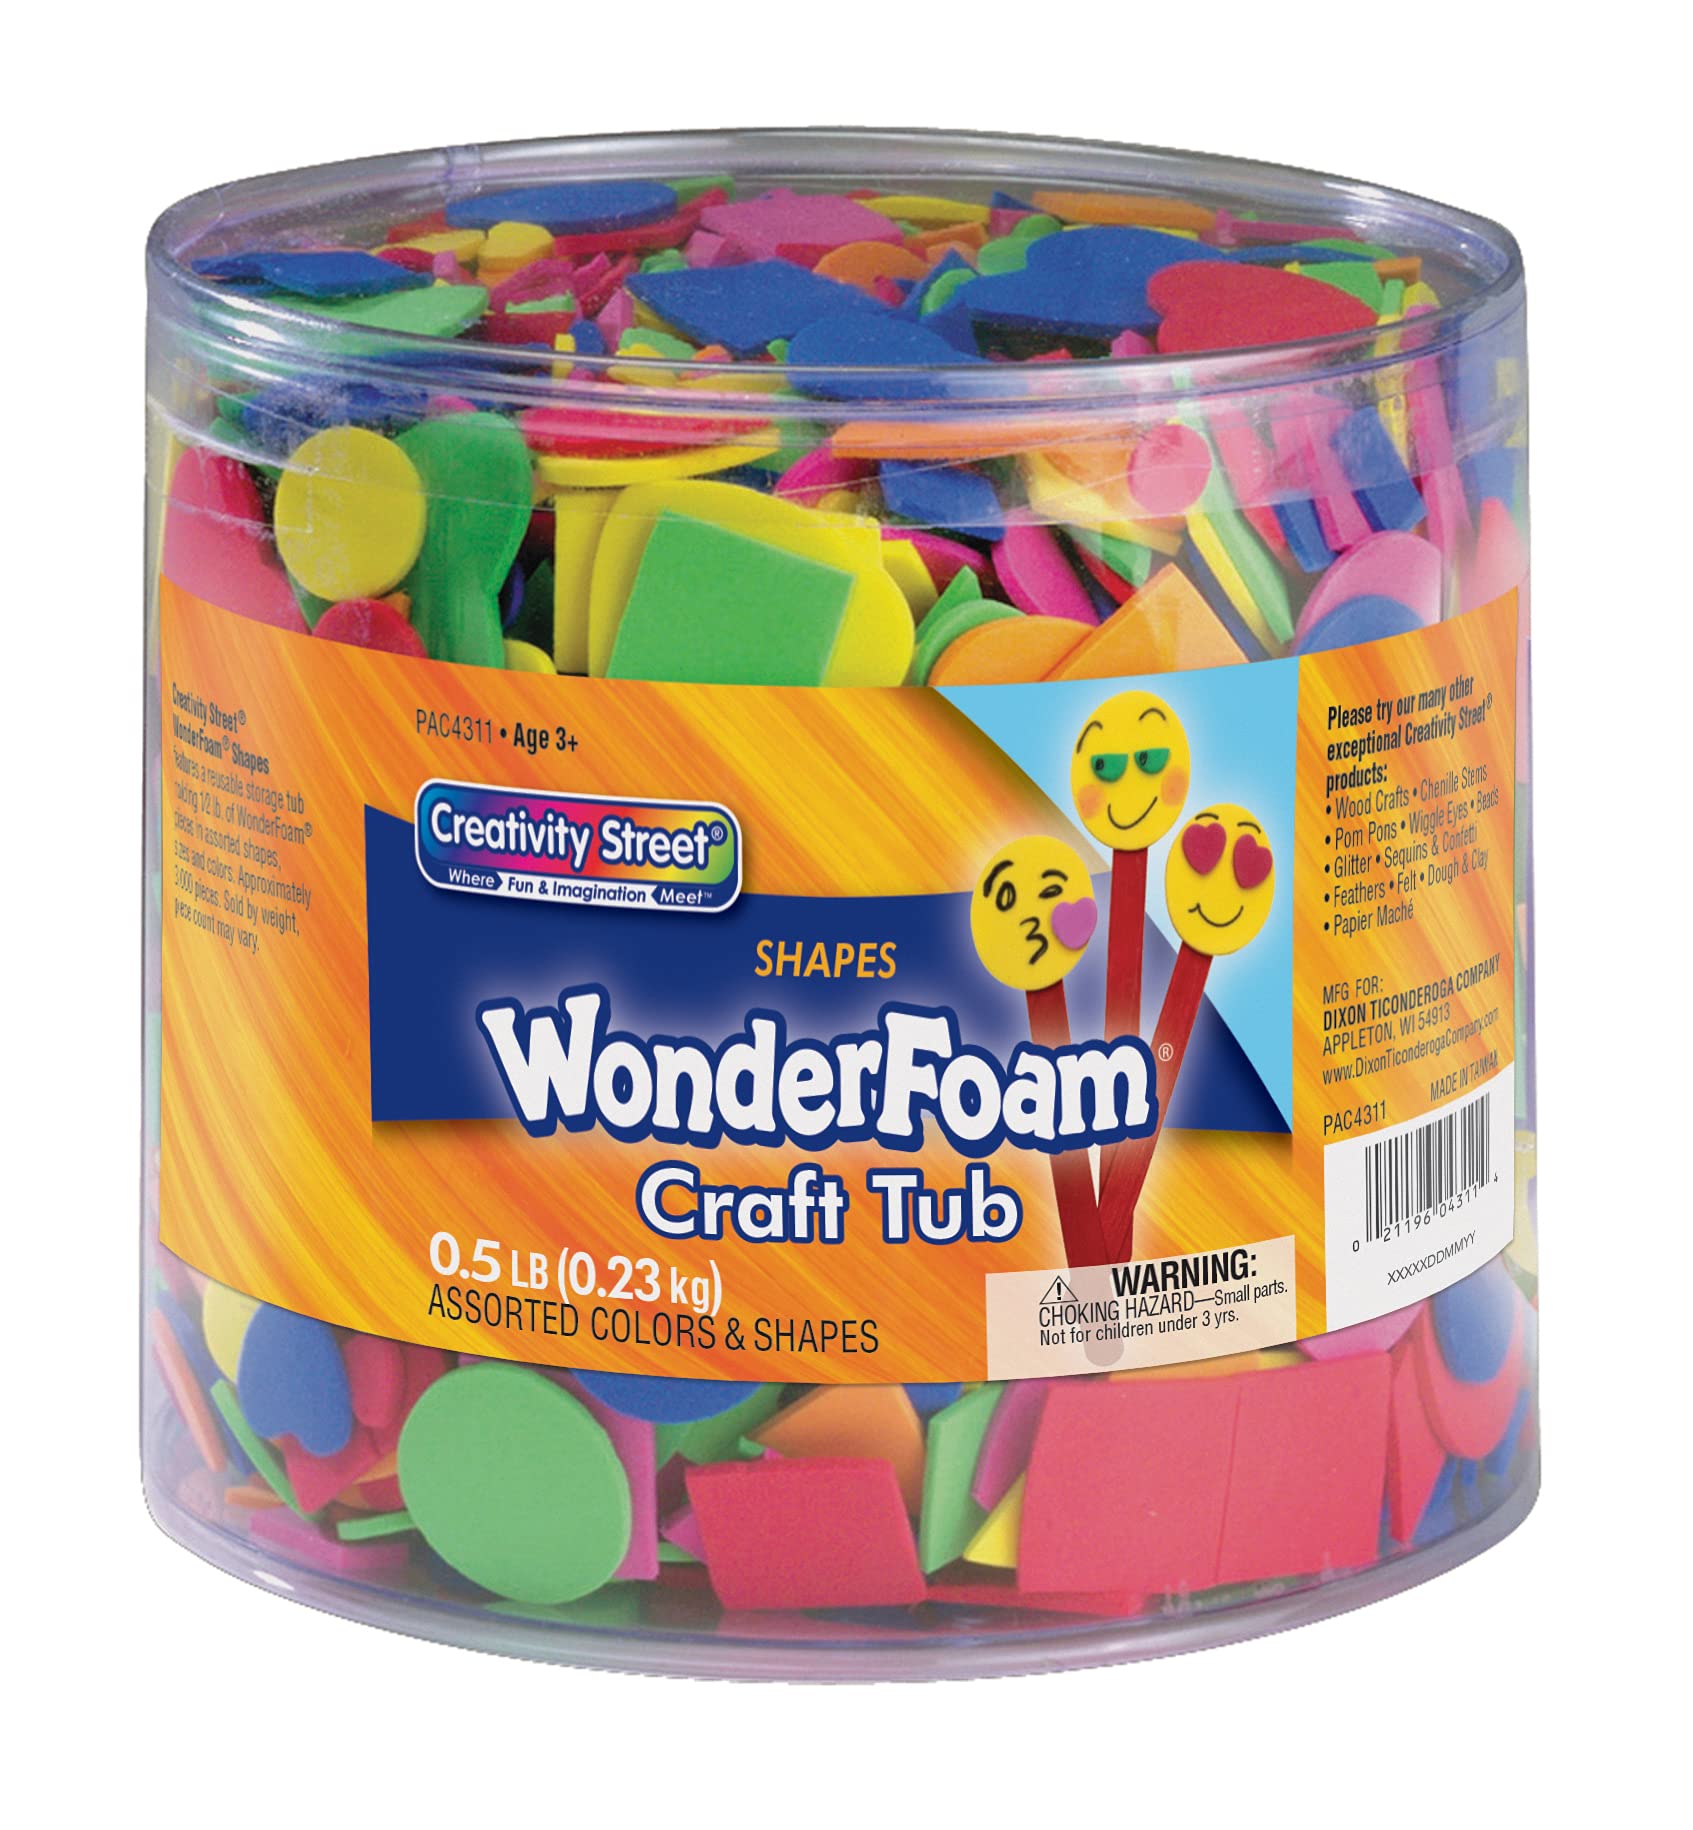 Chenille Kraft Wonderfoam Colors May Vary Shape Decorative Foam Shape, Colors and Size Varies, 0.5 lb Tub, Pack of 3000